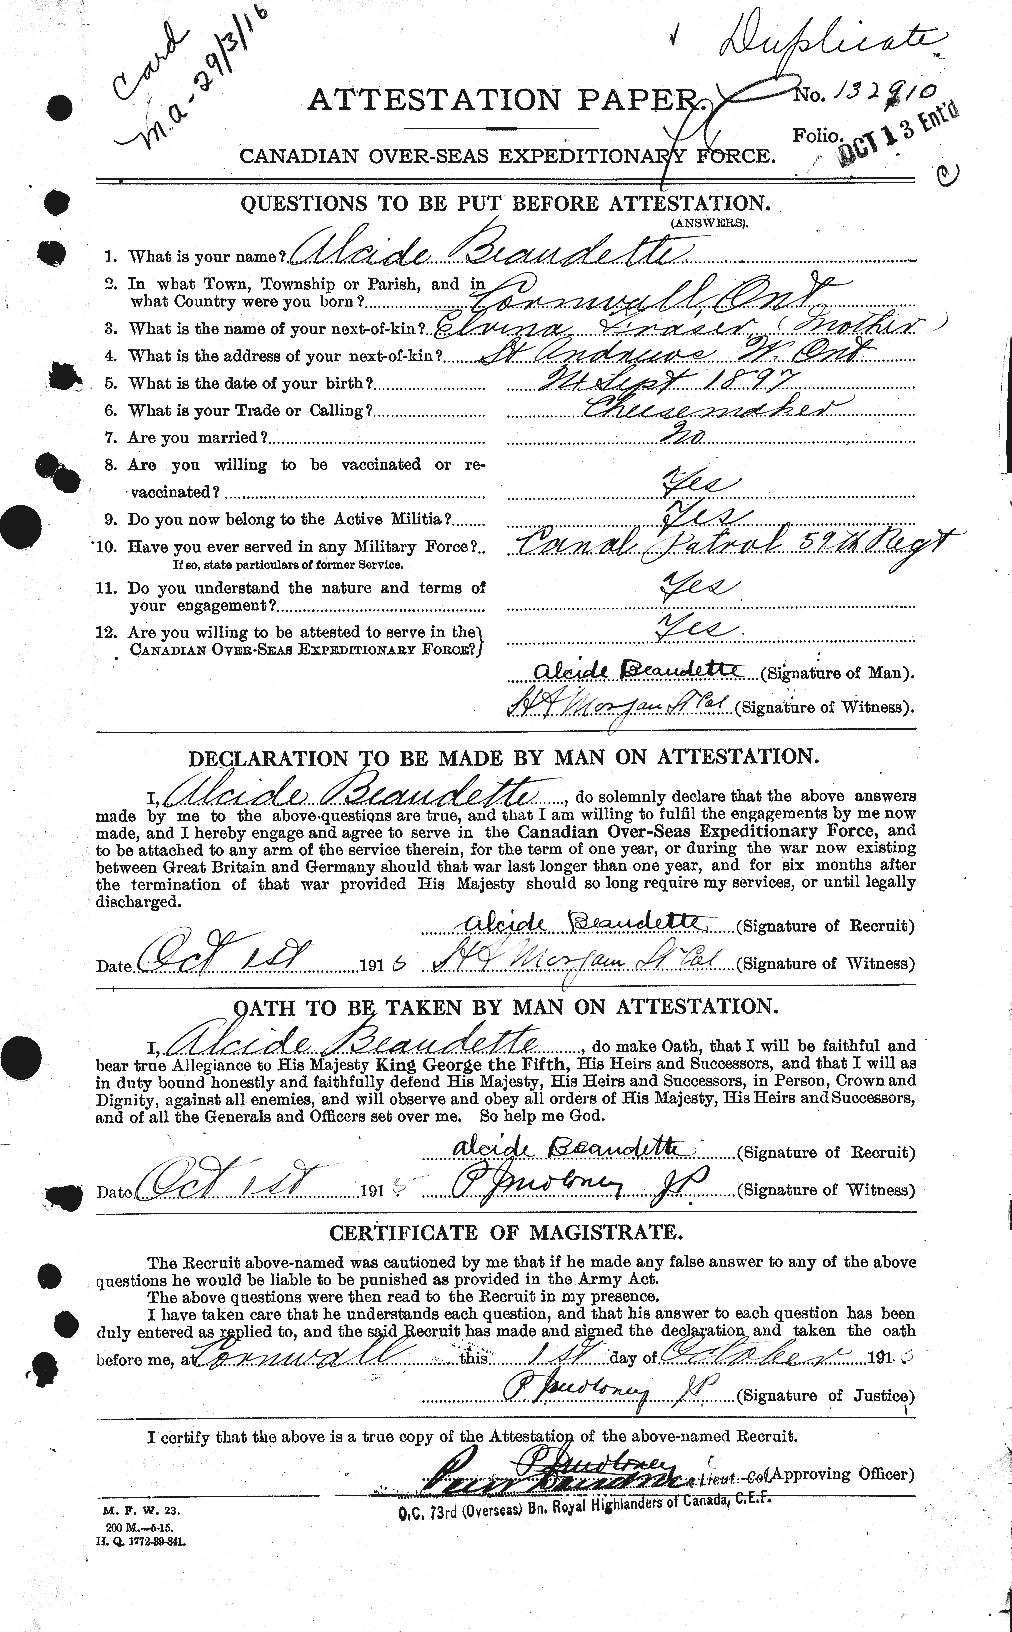 Personnel Records of the First World War - CEF 231131a